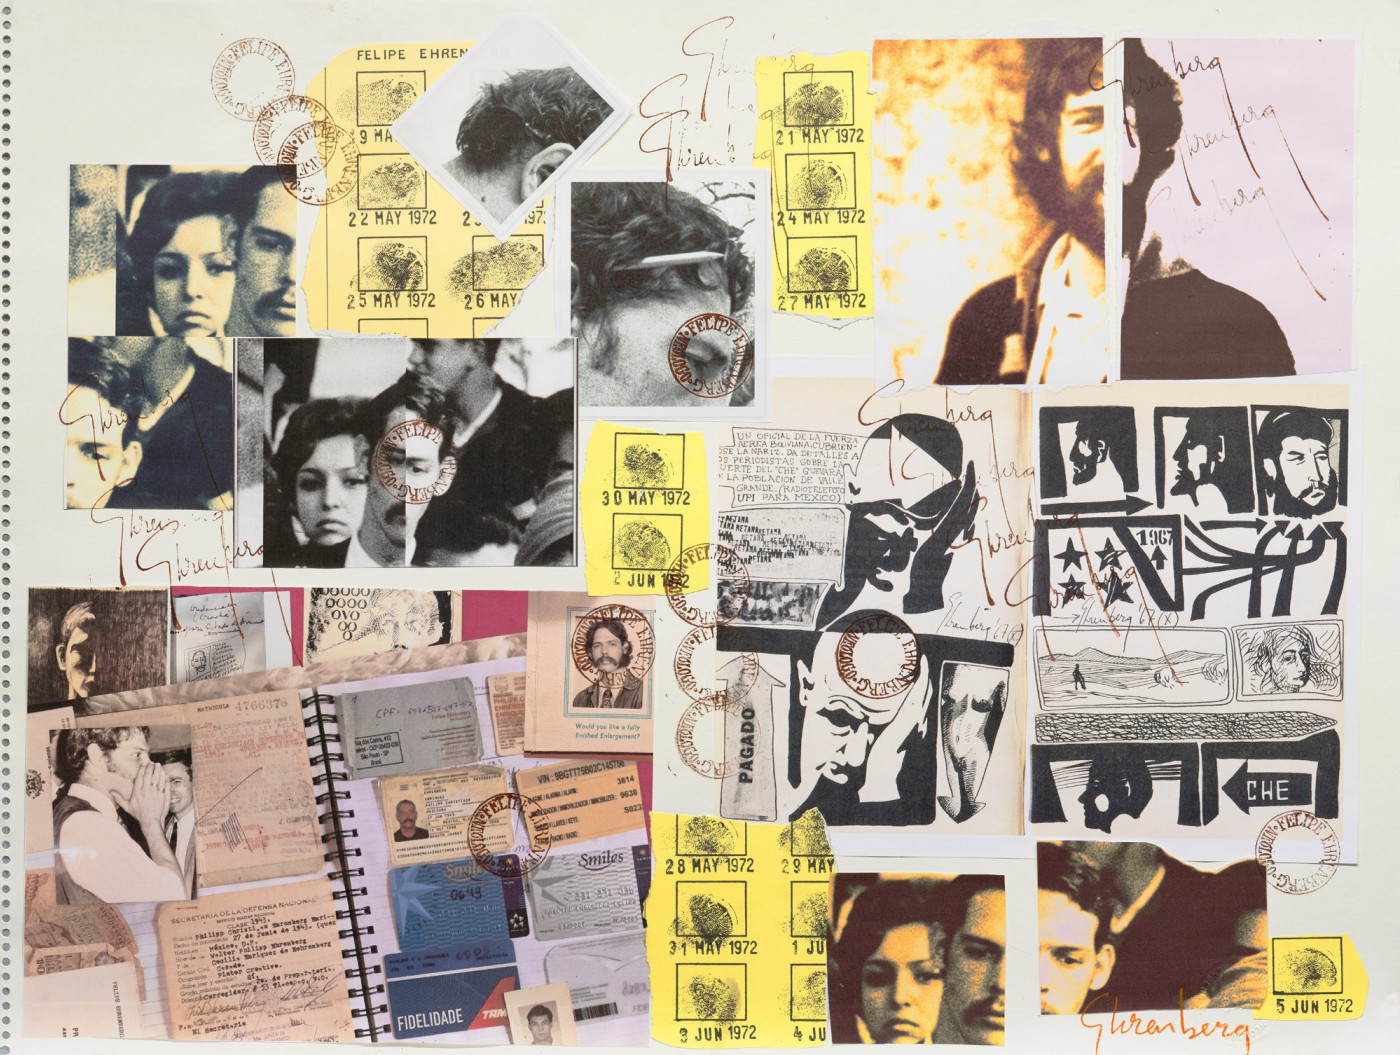 A collage showing fragments of fingerprint and identification documents and photos overlaid with handwritten text and stamps.